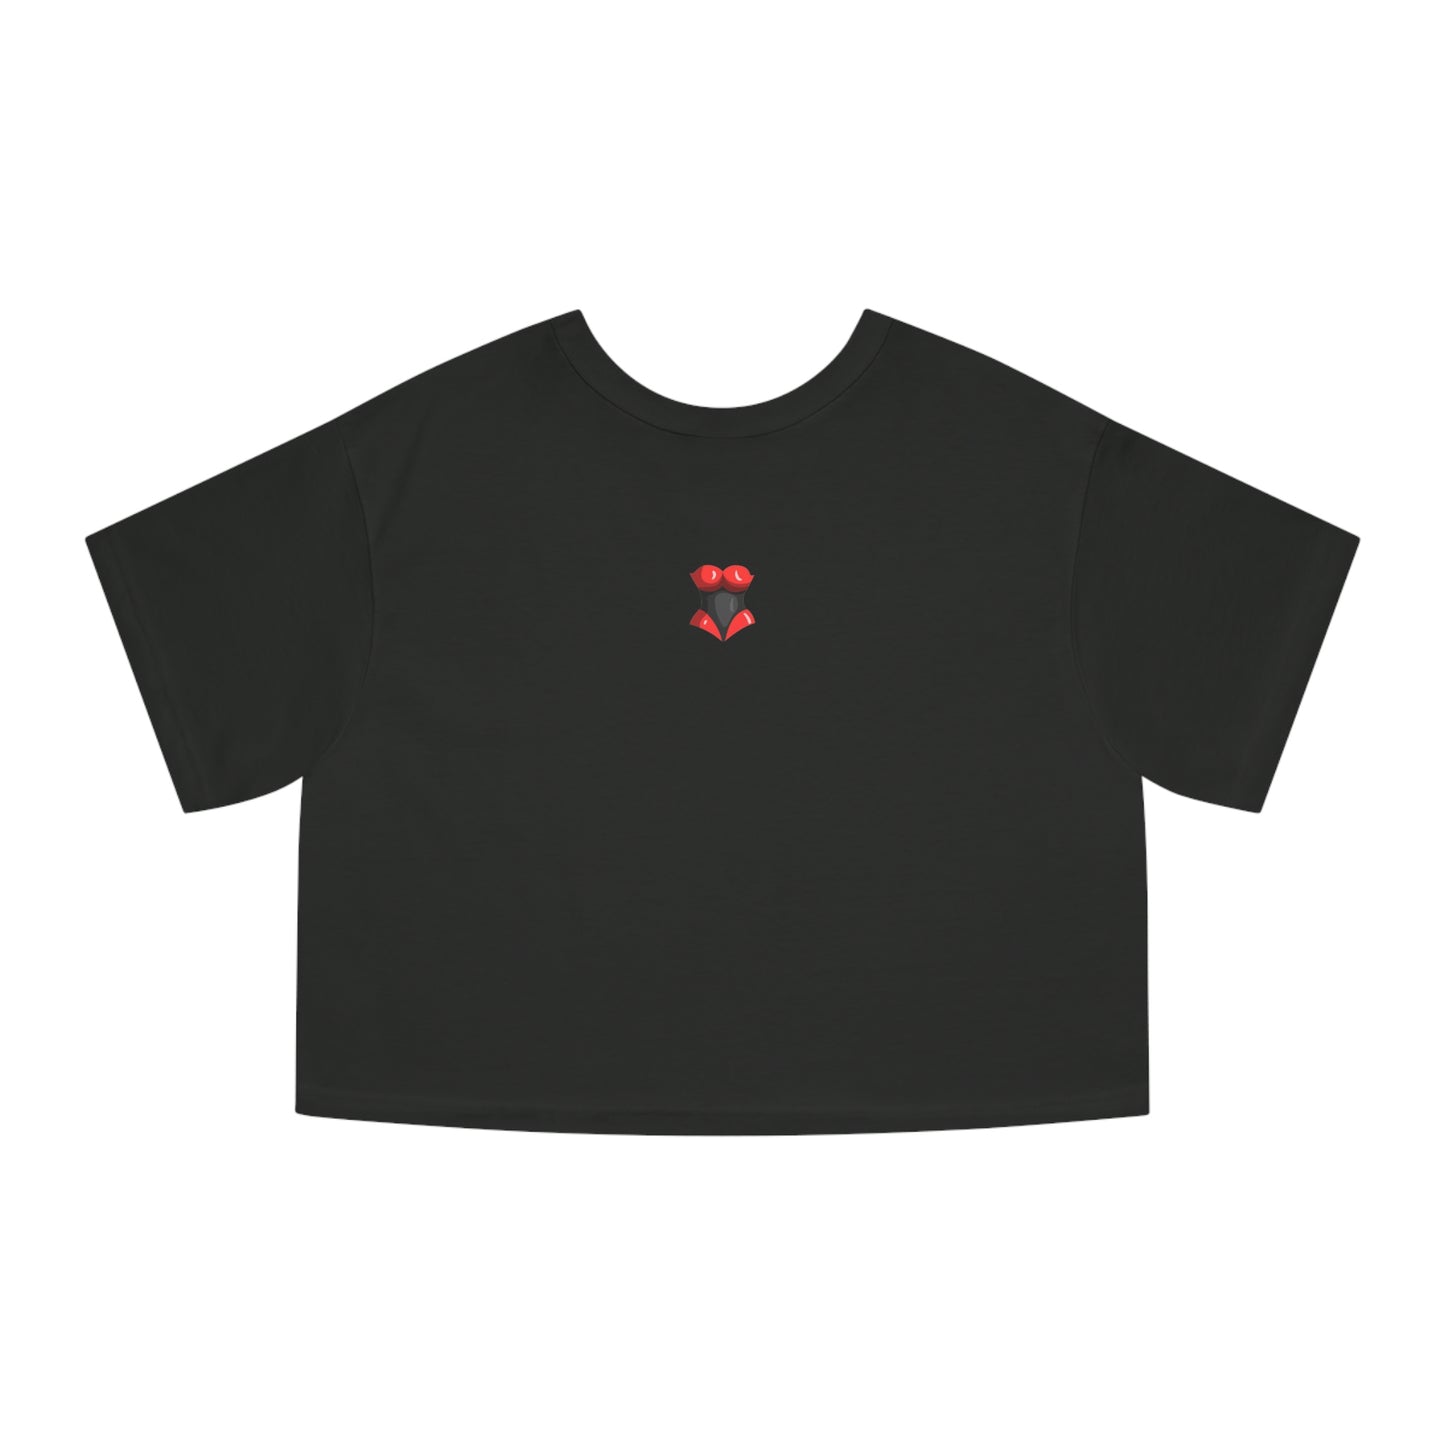 The Ethics | Champion Cropped T-Shirt